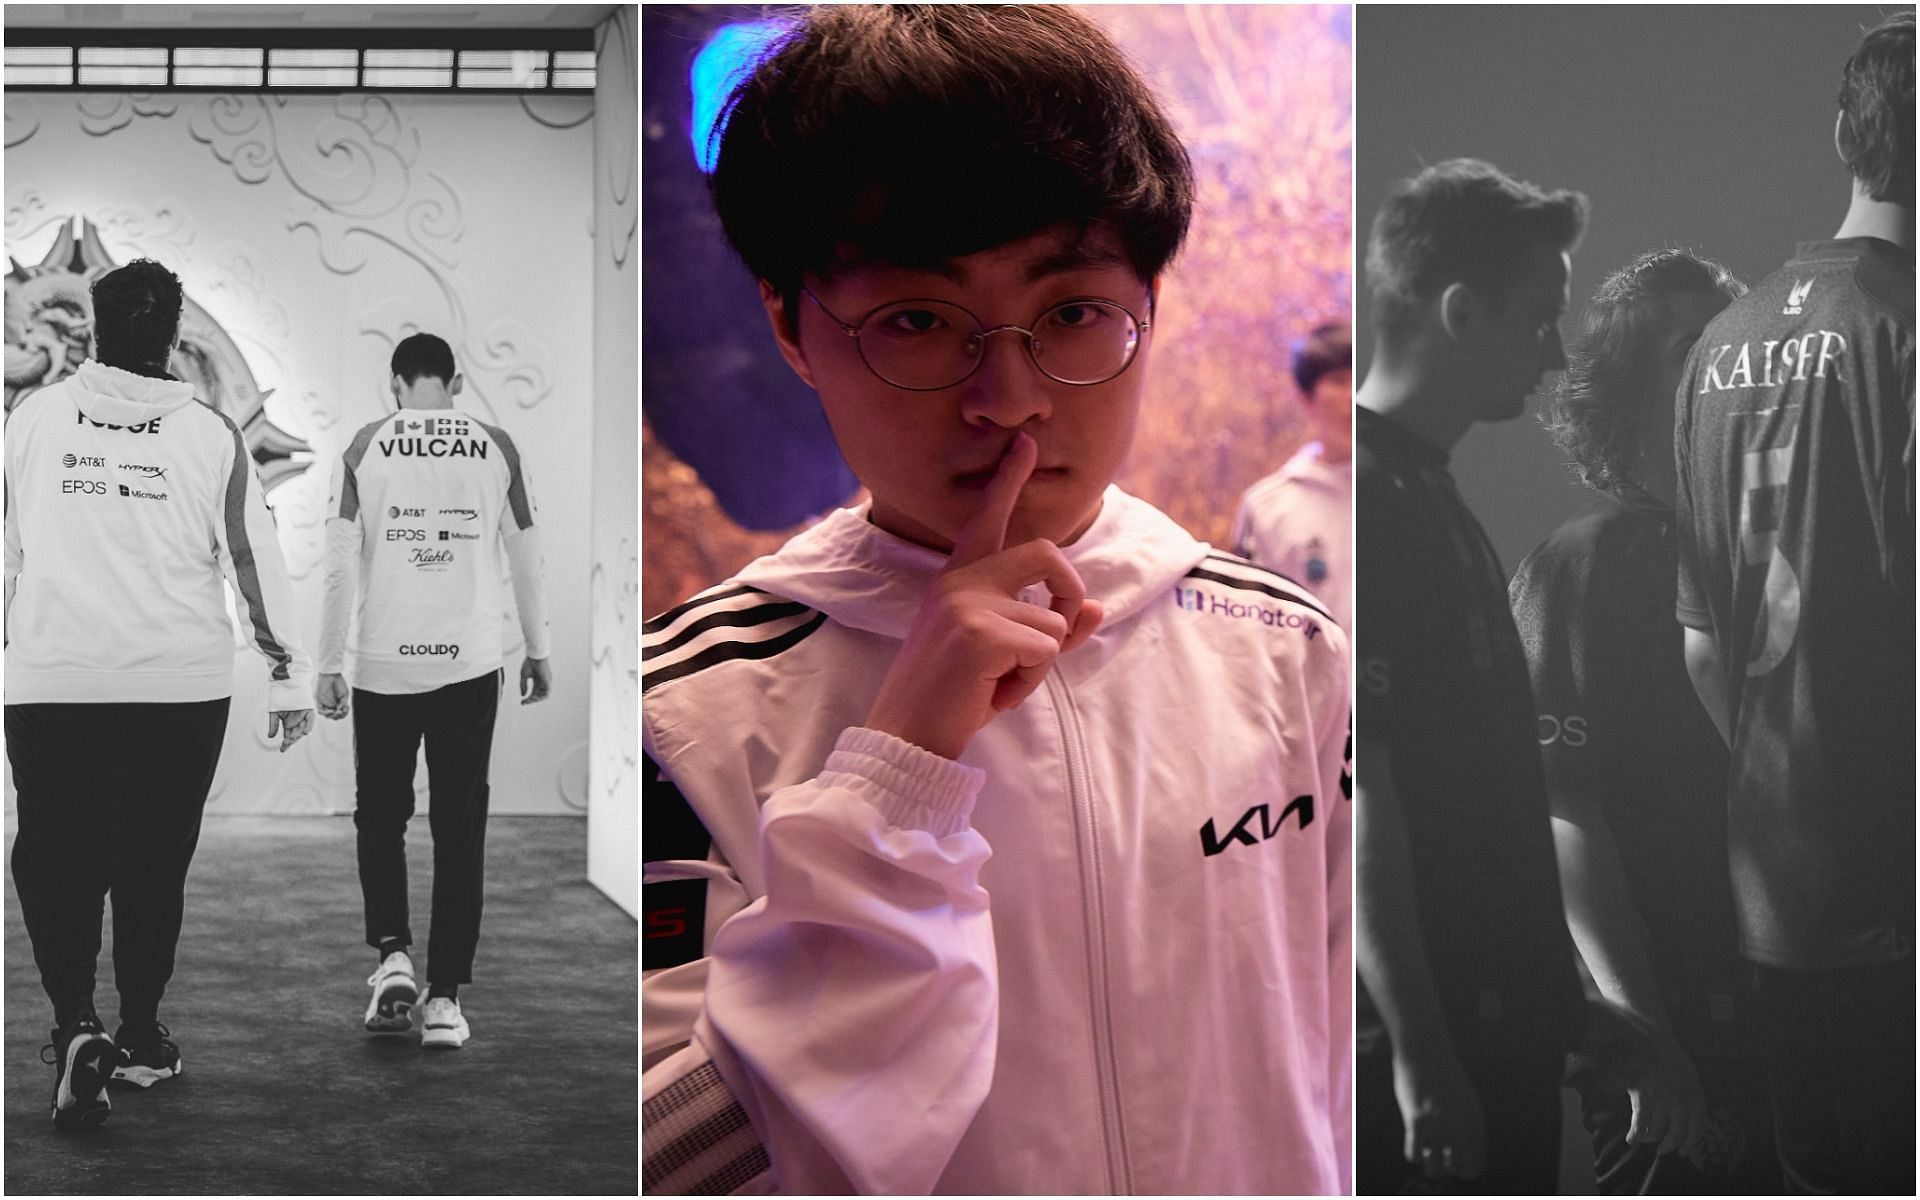 LCK has proven that it is miles ahead of LEC and LCS when it comes to playing League of Legends (Image via League of Legends)